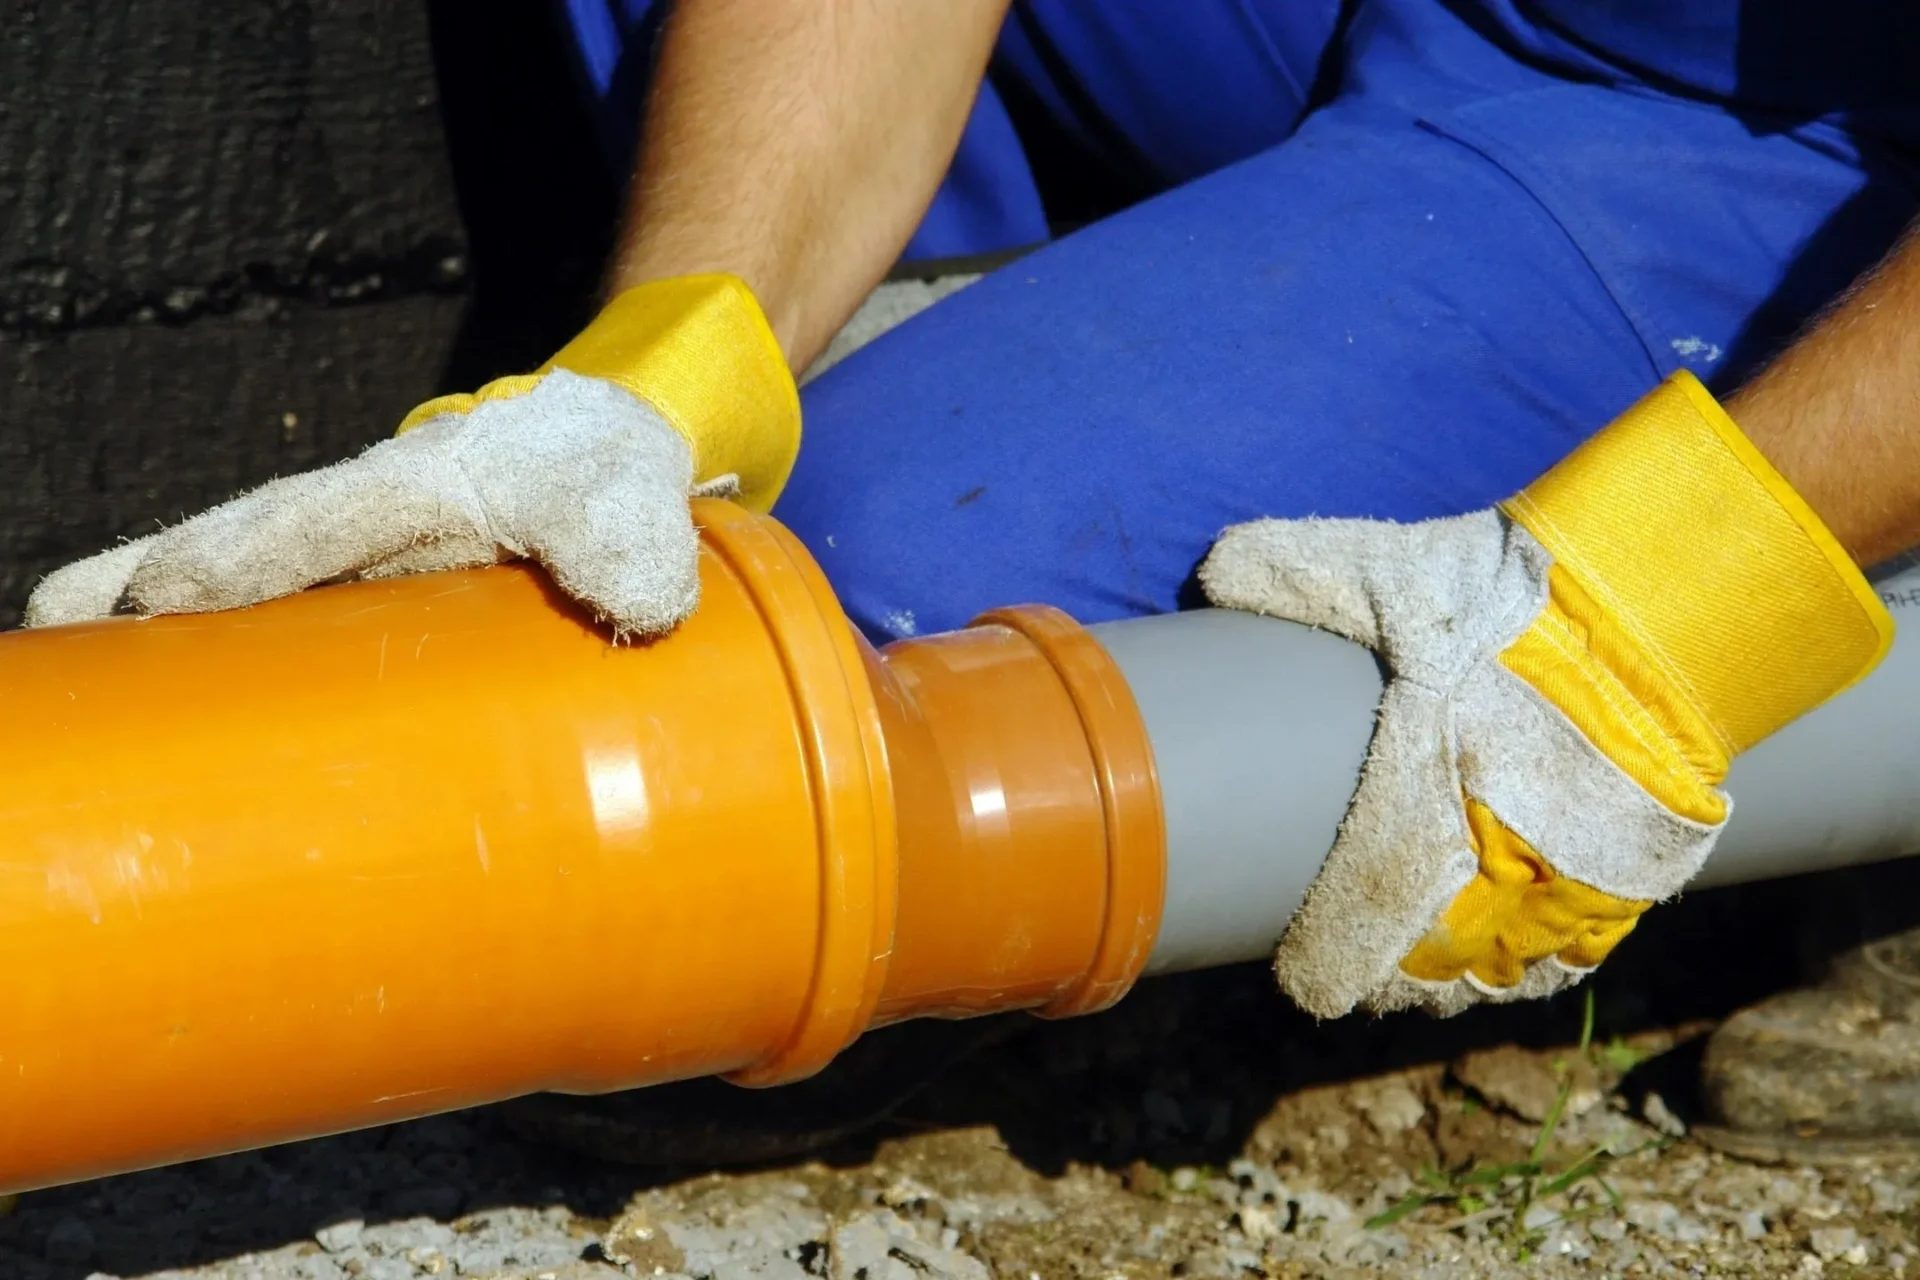 A person in blue shirt and yellow gloves holding orange pipe.